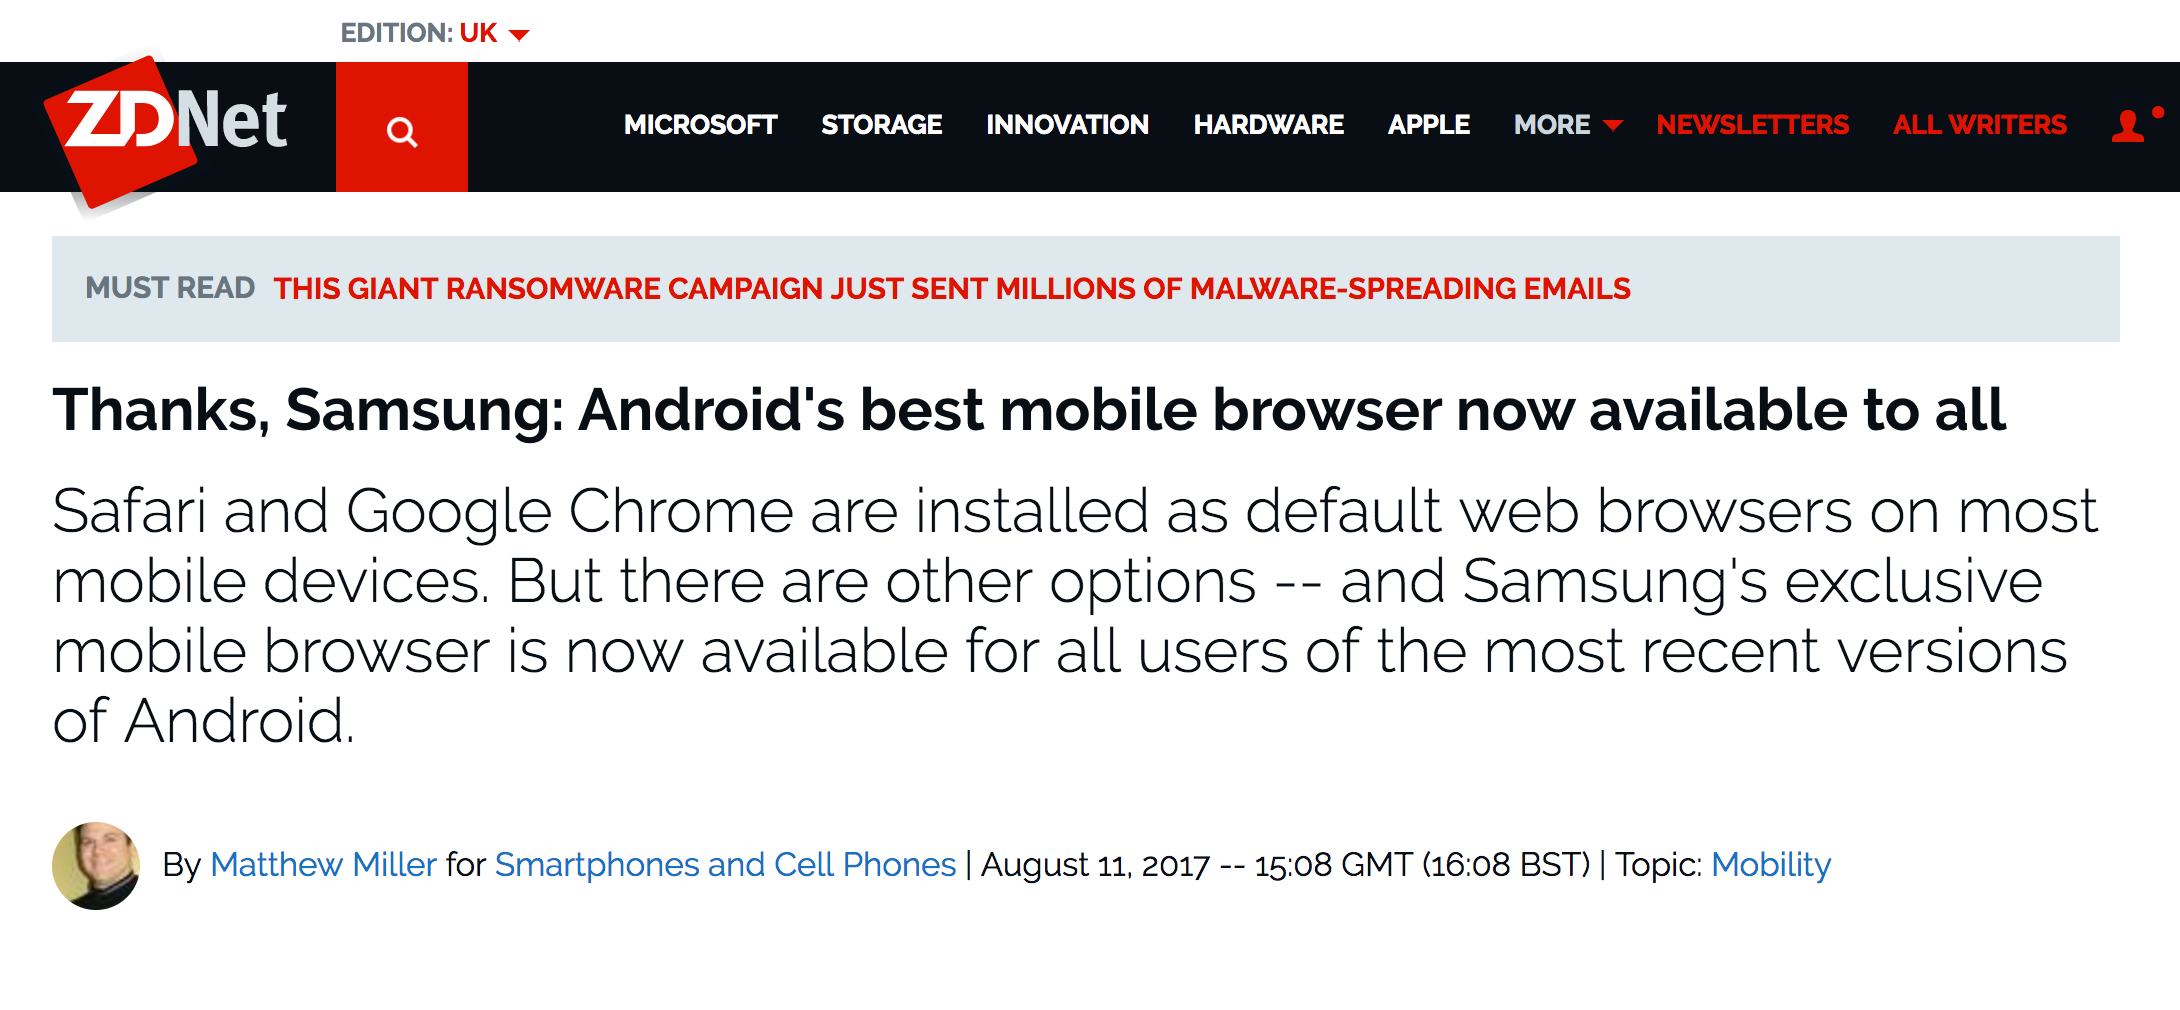 ZDNet article calling it the best Android browser